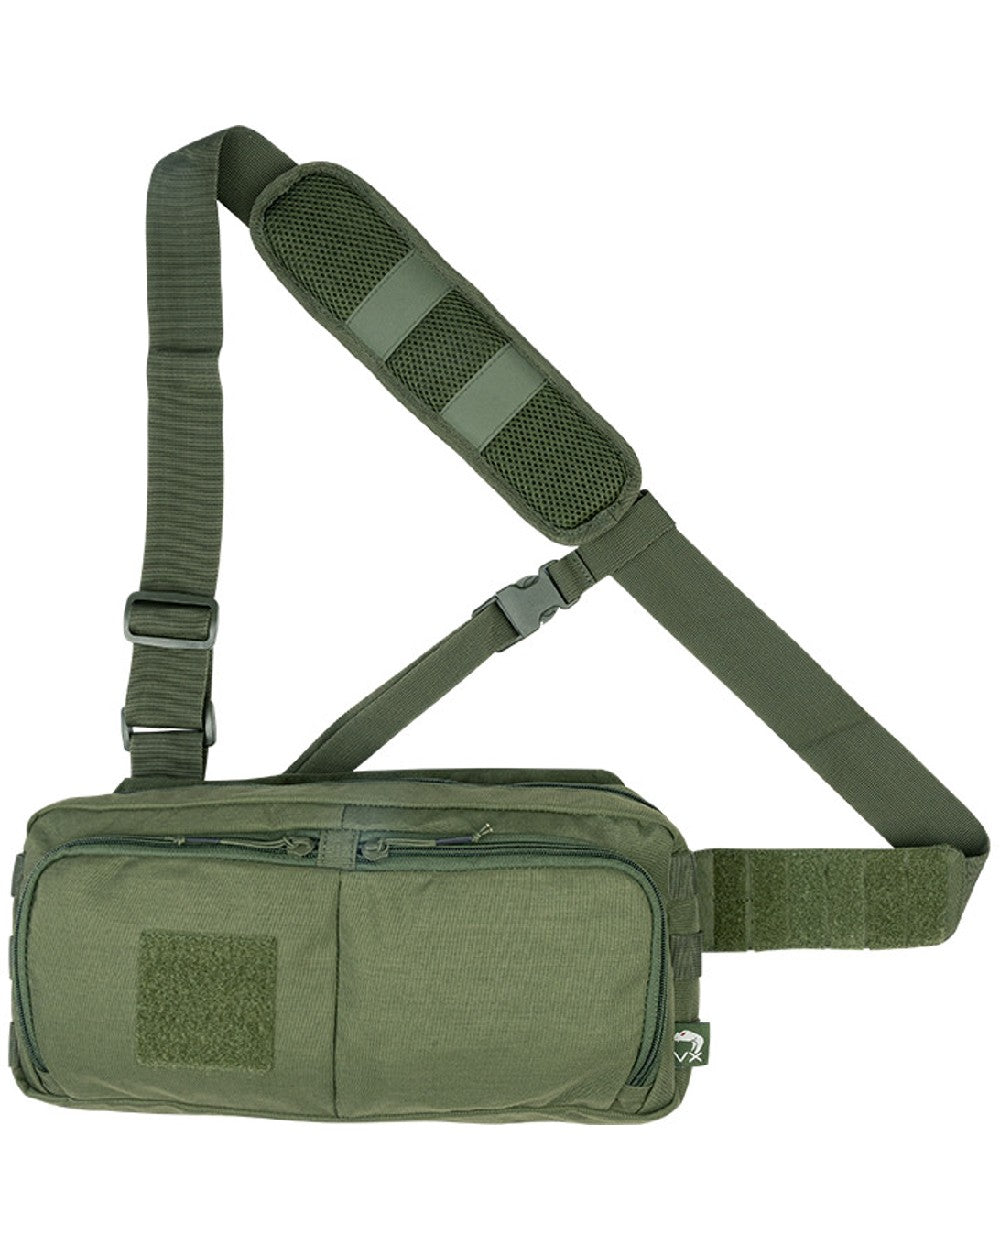 Viper VX Buckle Up Sling Pack in Green 